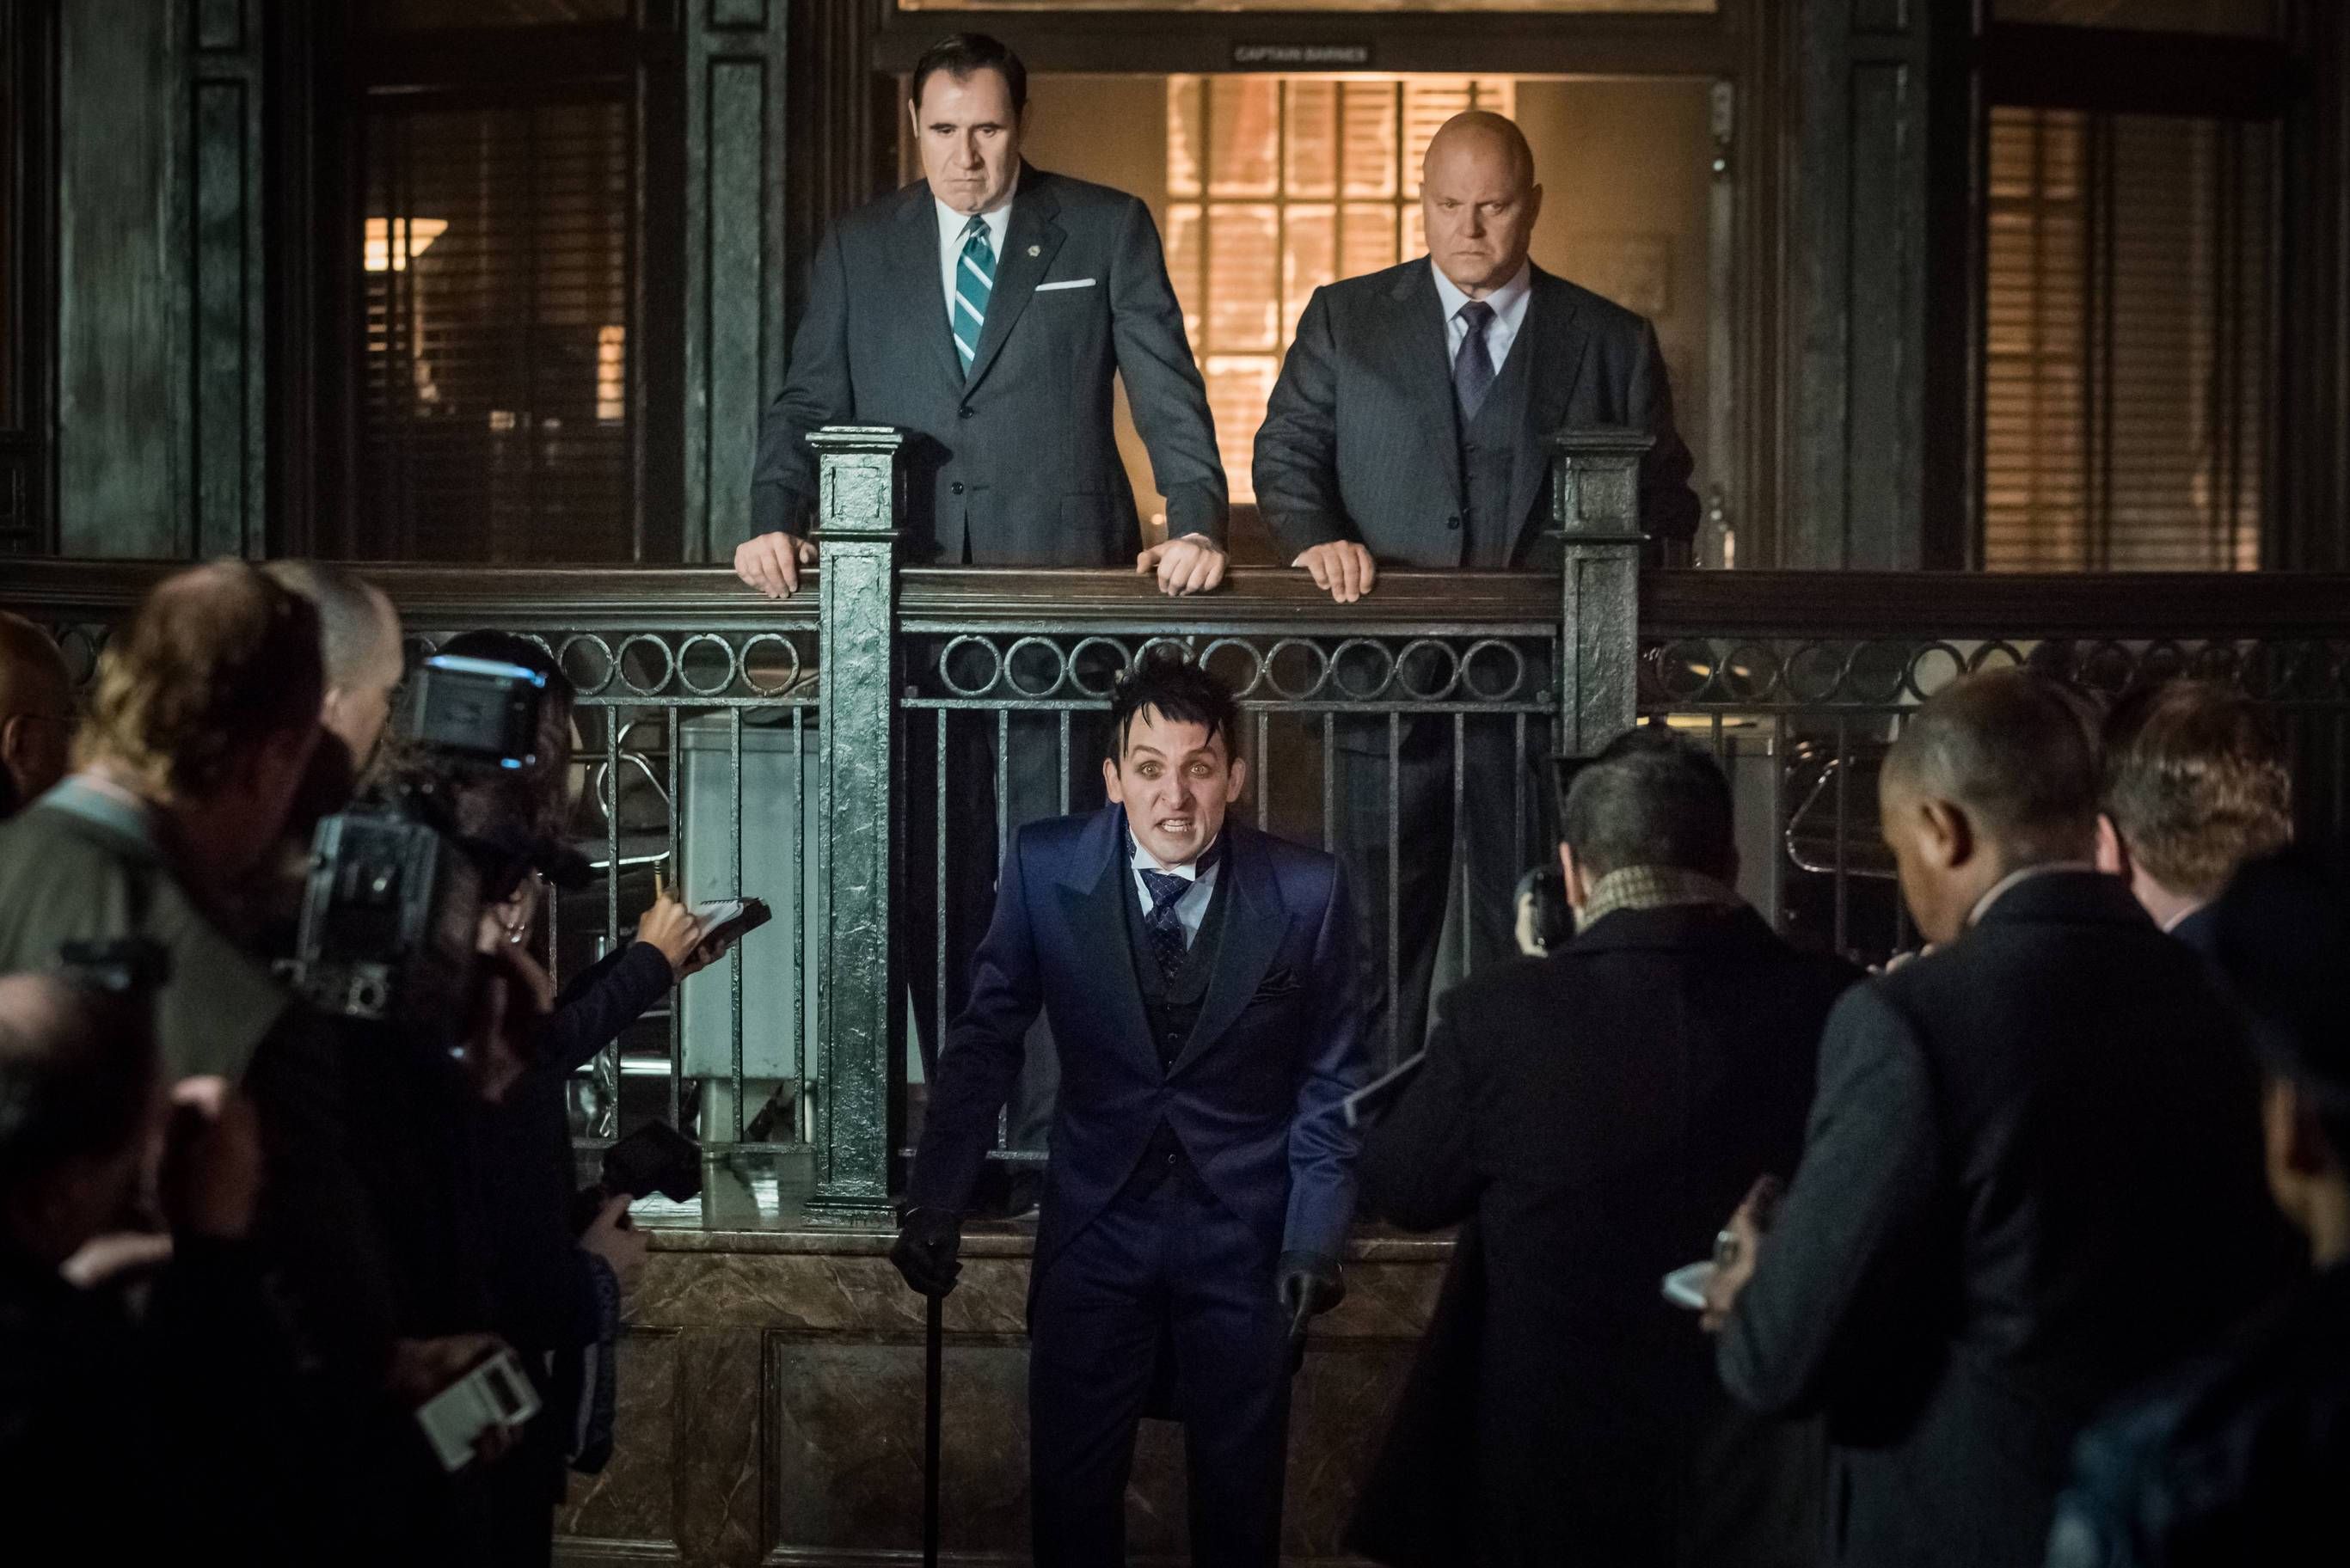 GOTHAM: L-R: Guest star Richard Kind, Robin Lord Taylor and Michael Chiklis in the ÒMad City: Better to Reign in HellÉÓ season premiere episode of GOTHAM airing airing Monday, Sept. 19 (8:00-9:01 PM ET/PT) on FOX. ©2015 Fox Broadcasting Co. Cr: Jeff Neumann/FOX.